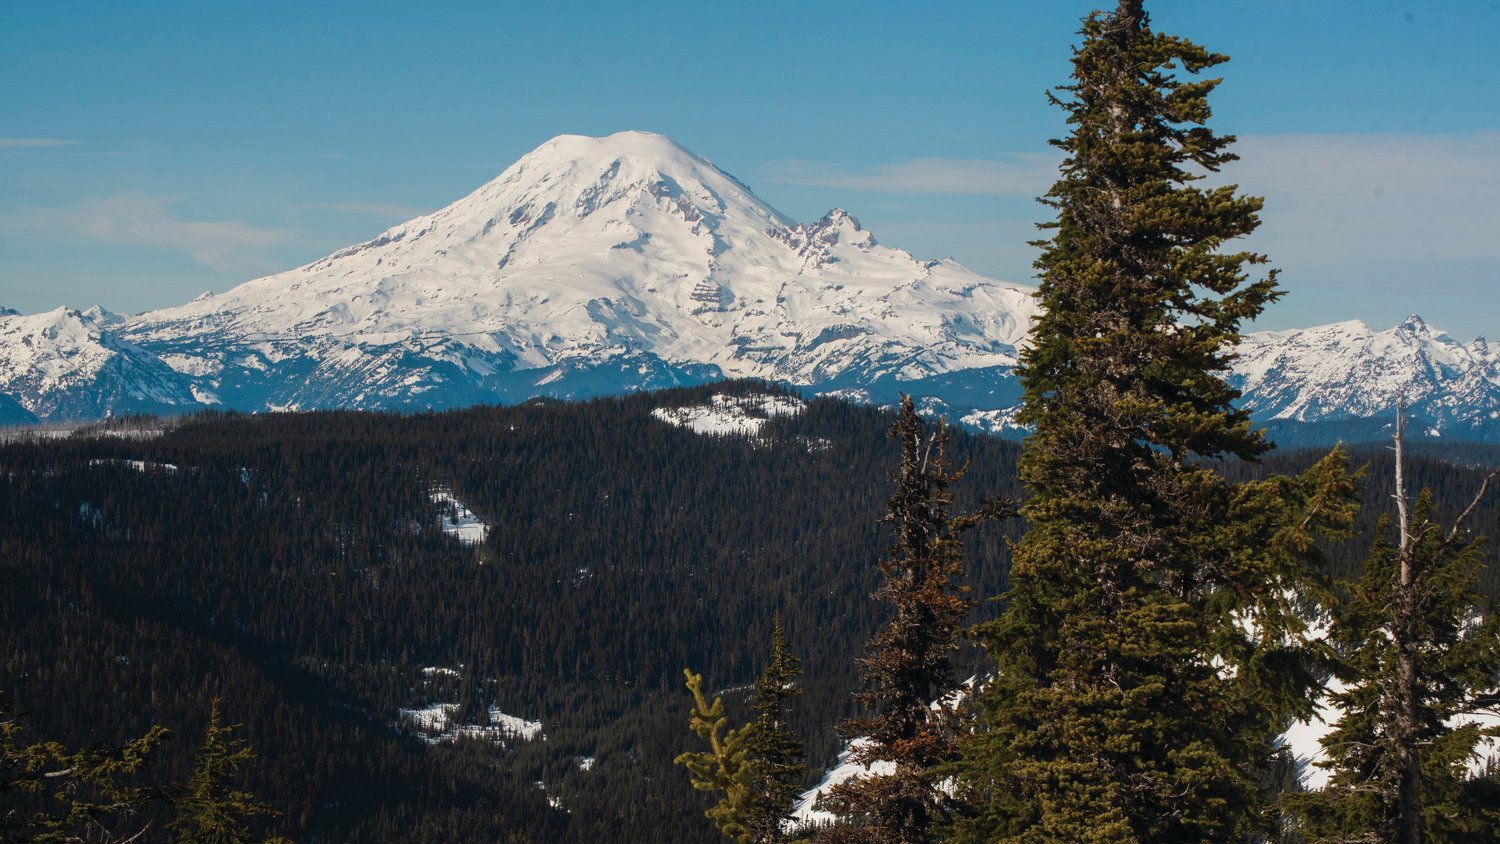 The glacial crown of Mount Rainier stretches above foothills seen from the White Pass Ski Area last January.